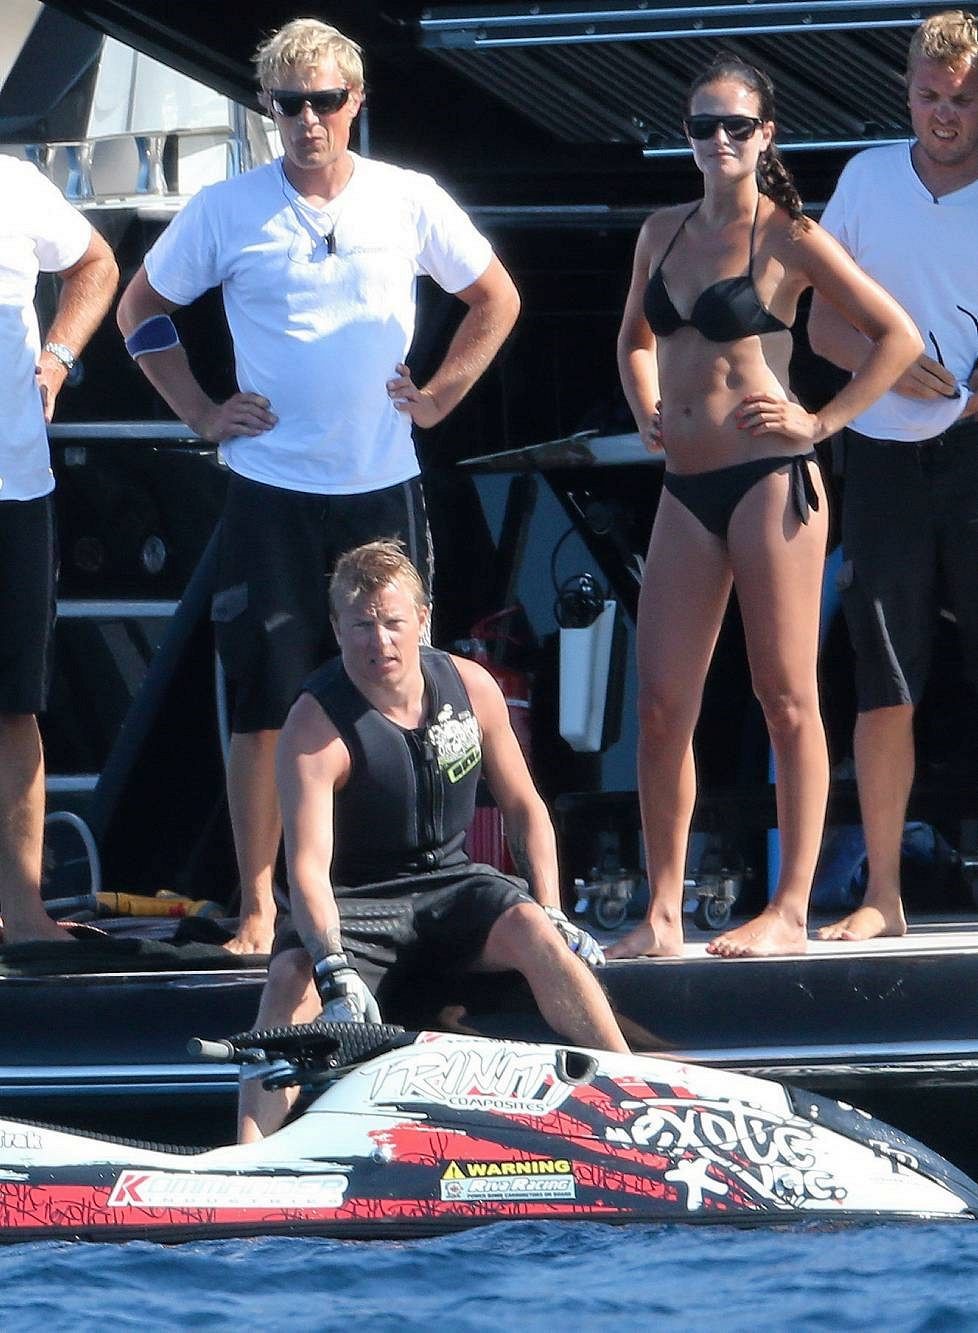 Kimi vacationing on his yacht off the Mediterranean island of Corsica in August 2014.